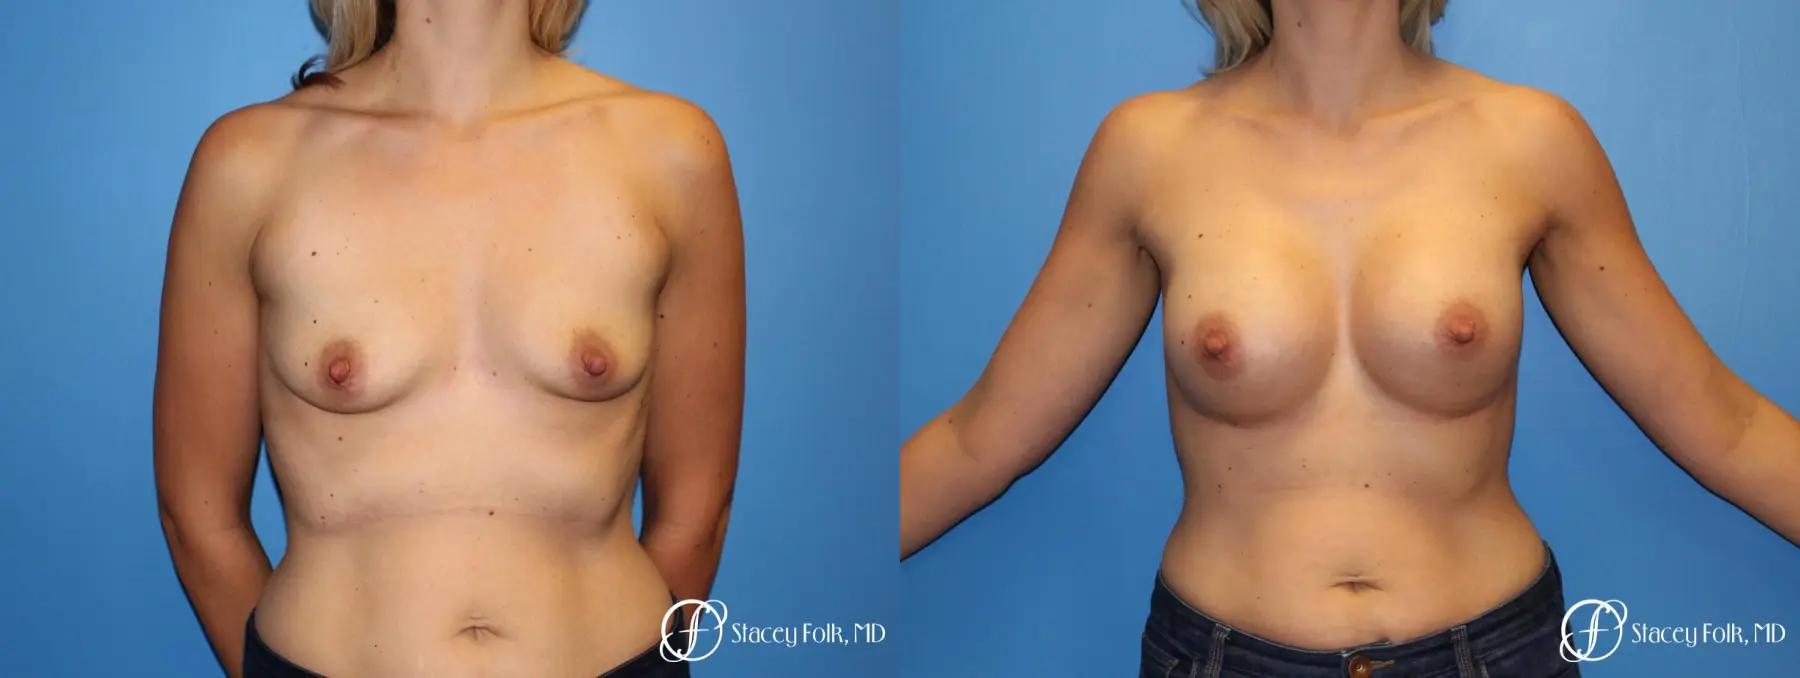 Denver Breast Augmentation 4816 - Before and After